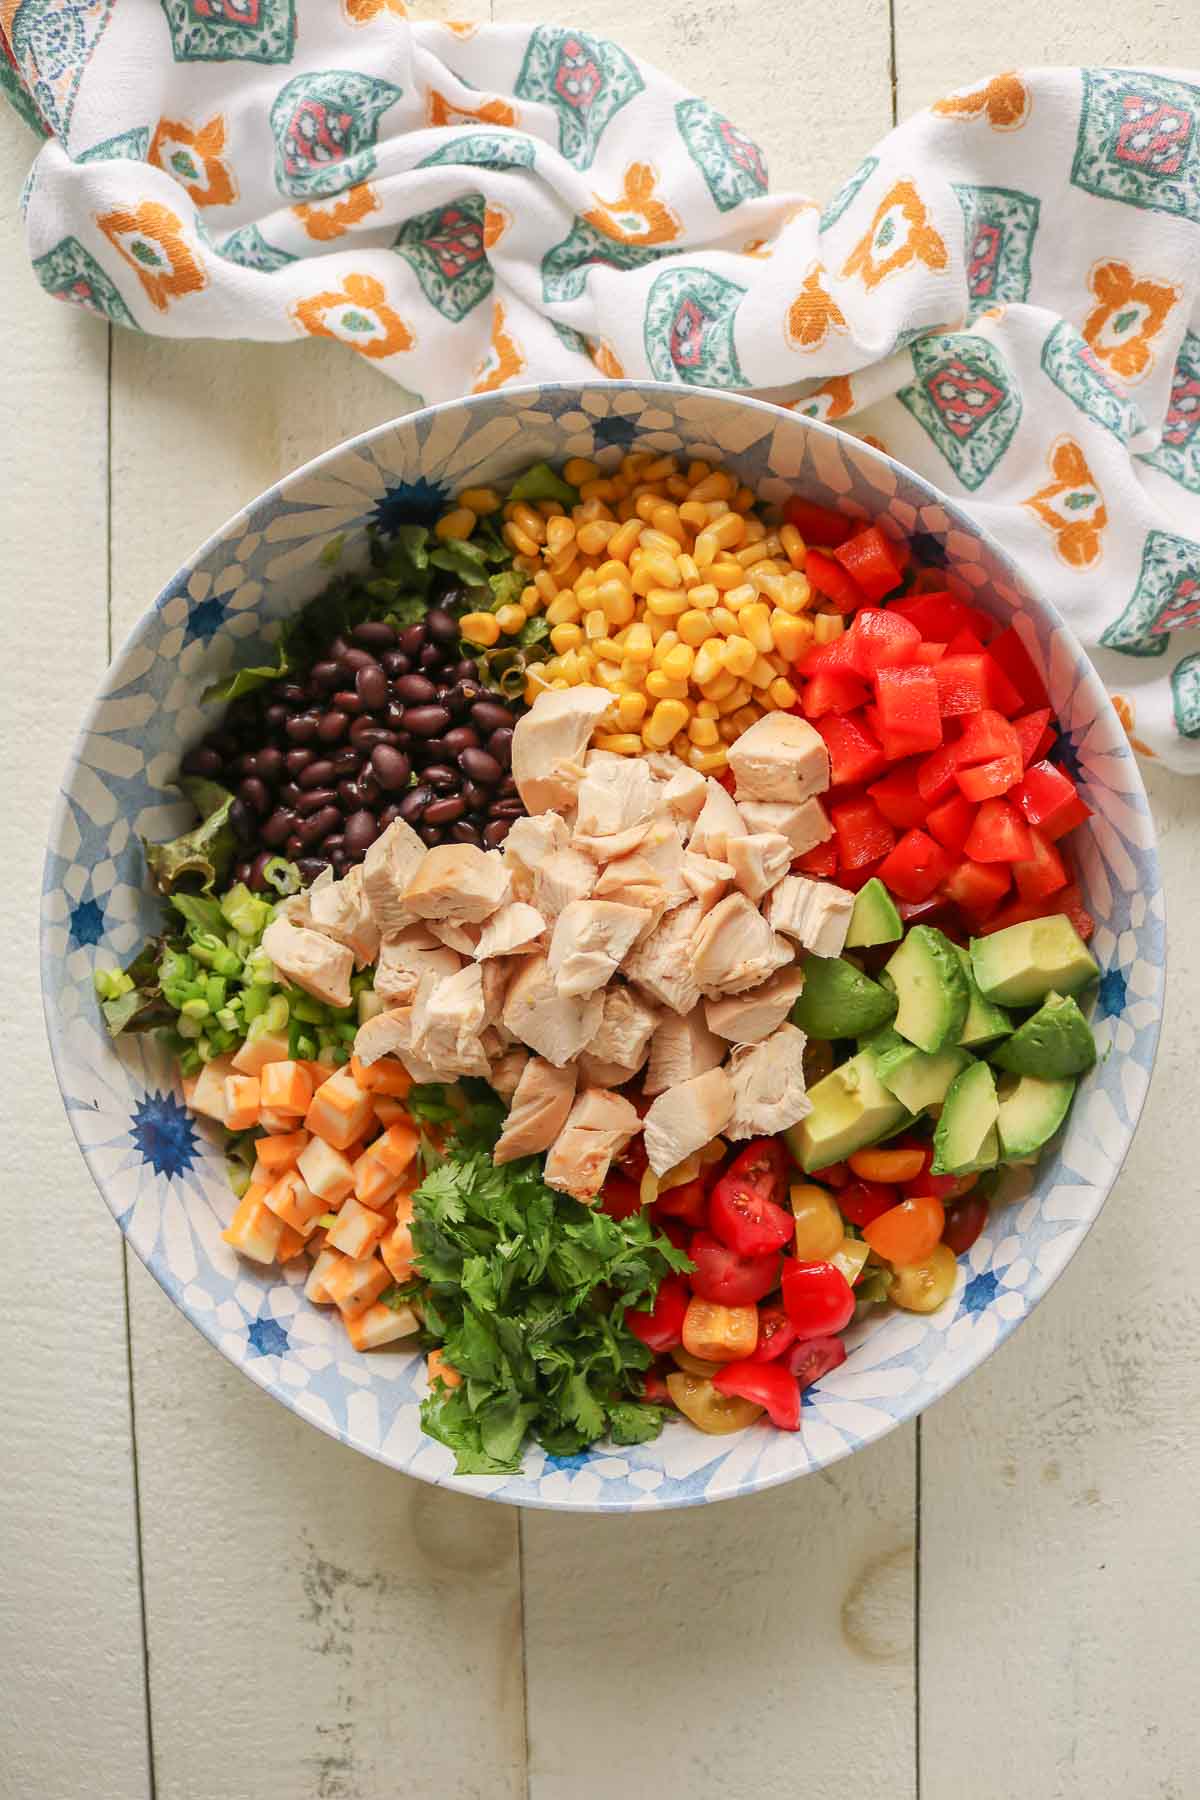 Southwest chicken salad ingredients in a serving bowl before being mixed together.